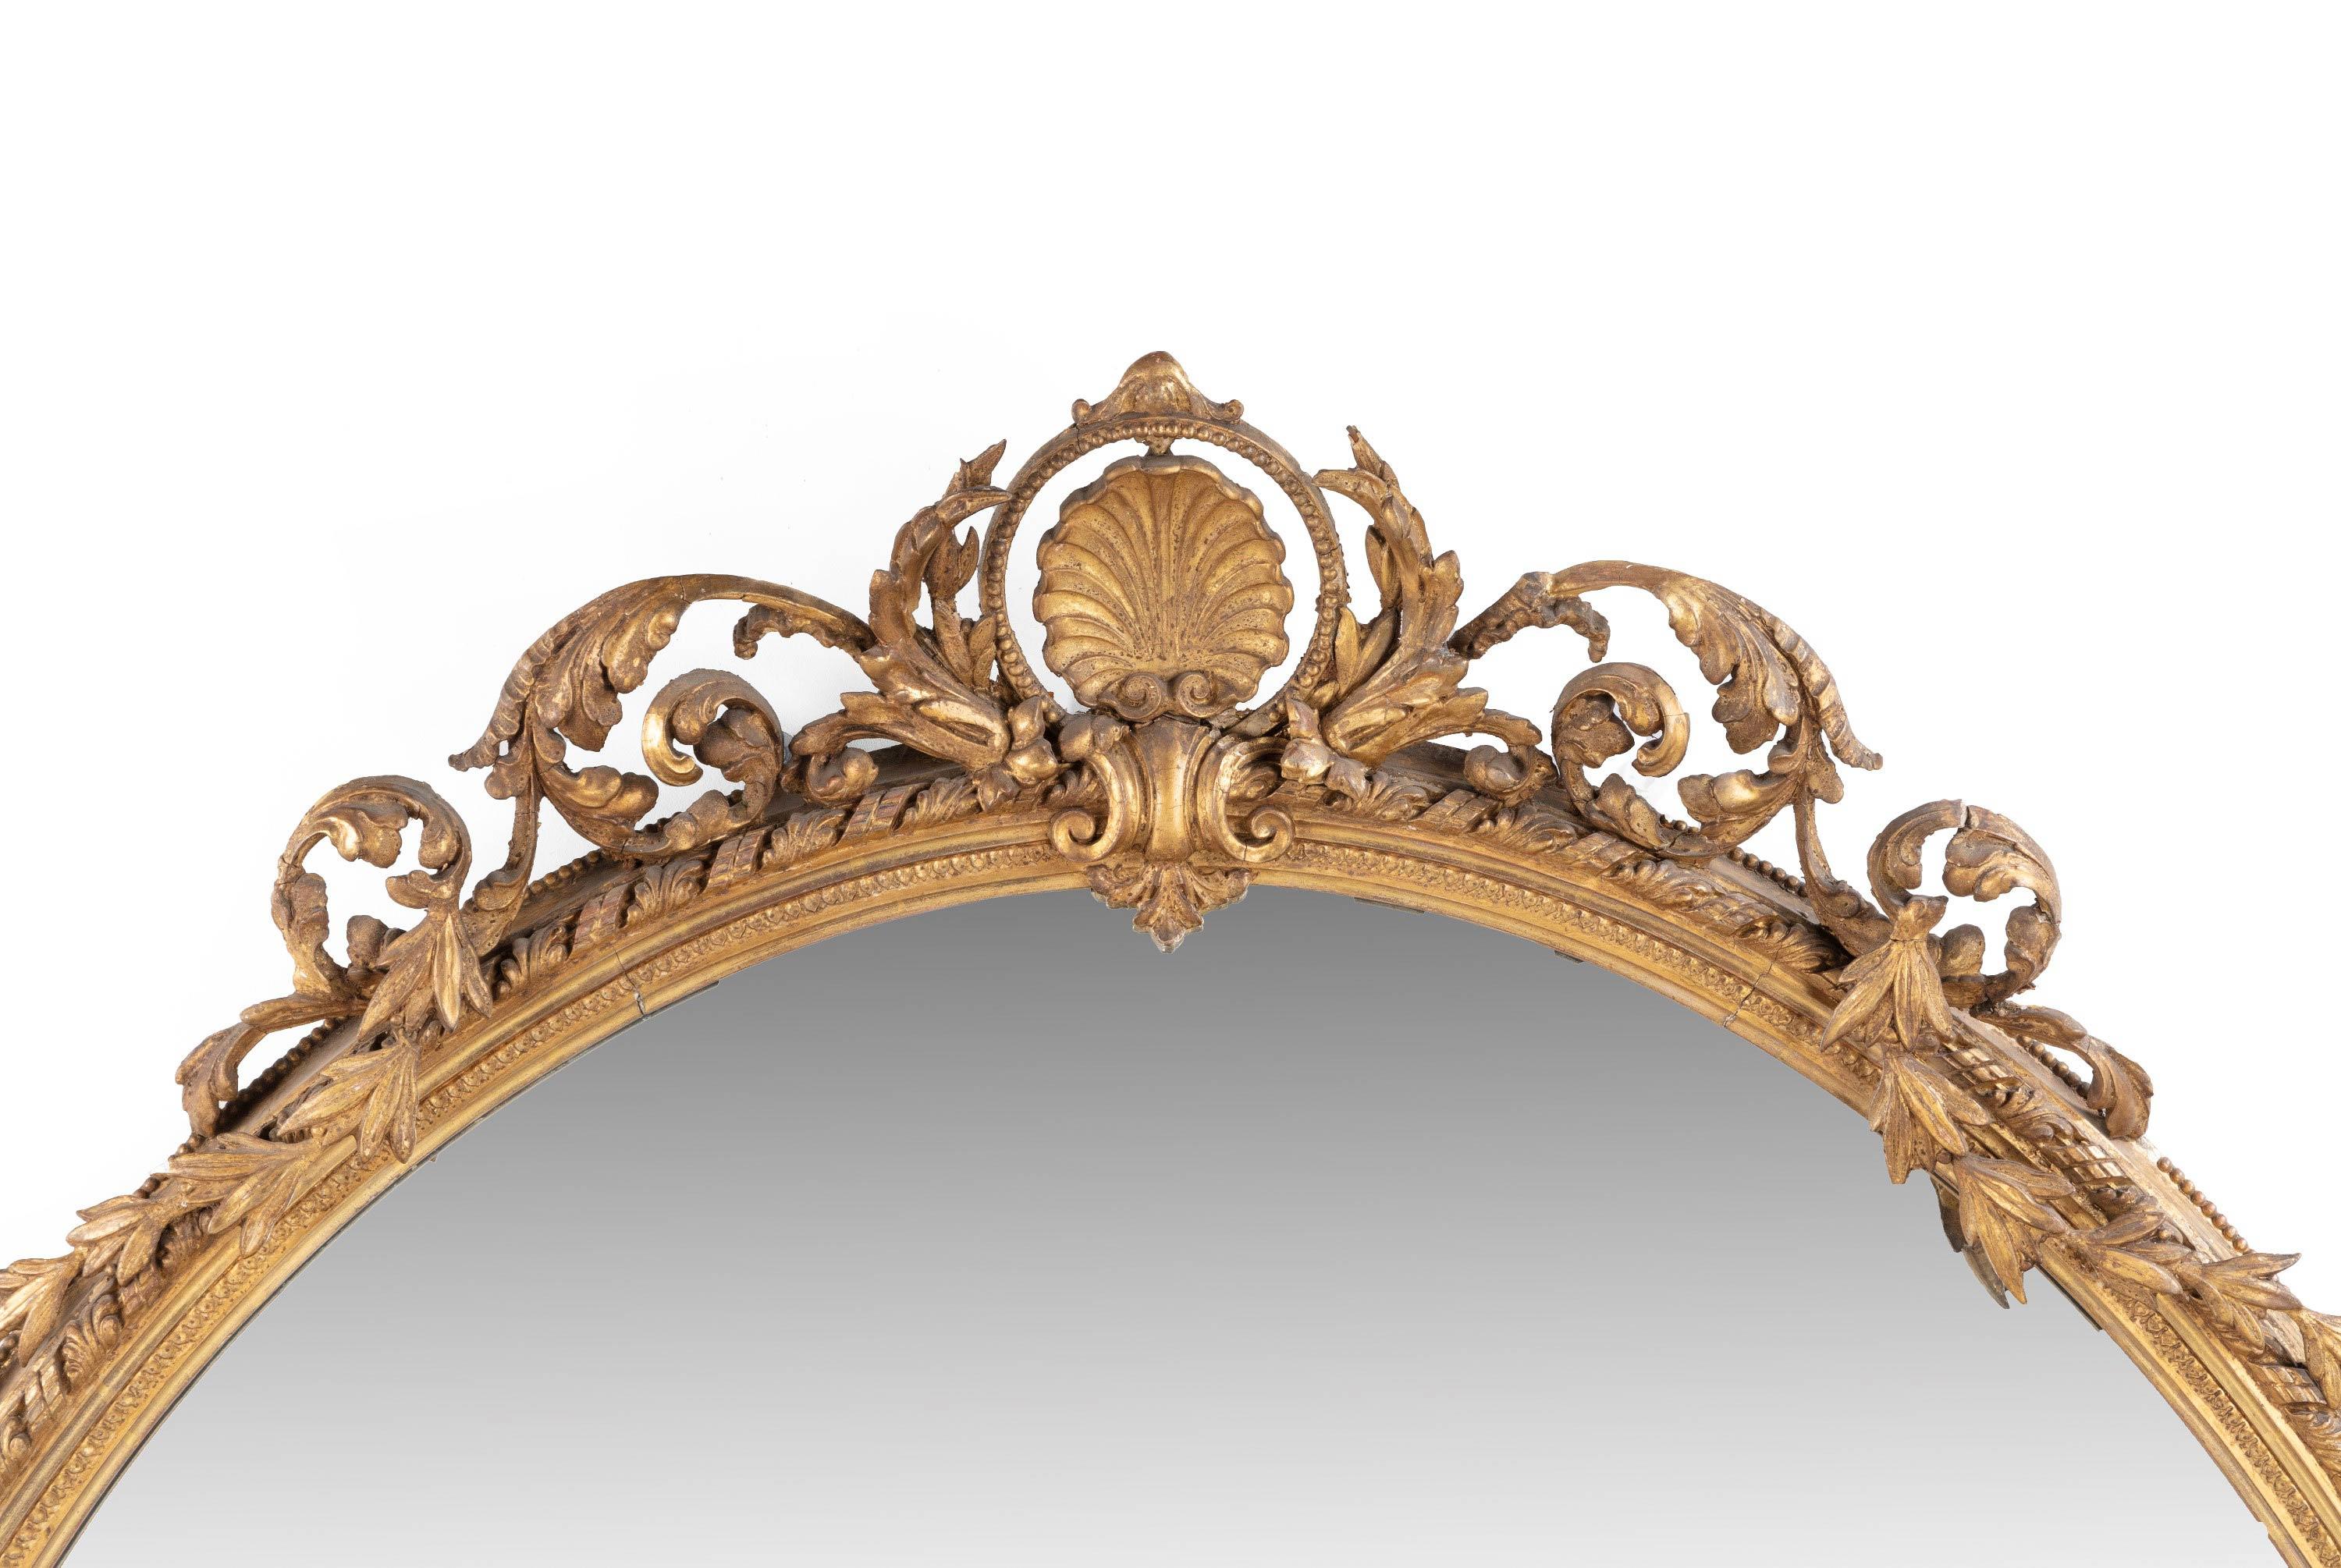 An unusually large, French, oval giltwood mirror, the top with finely carved swags and decoration. The outer rim with continuous rope and leaf decoration. Original gilding.
 